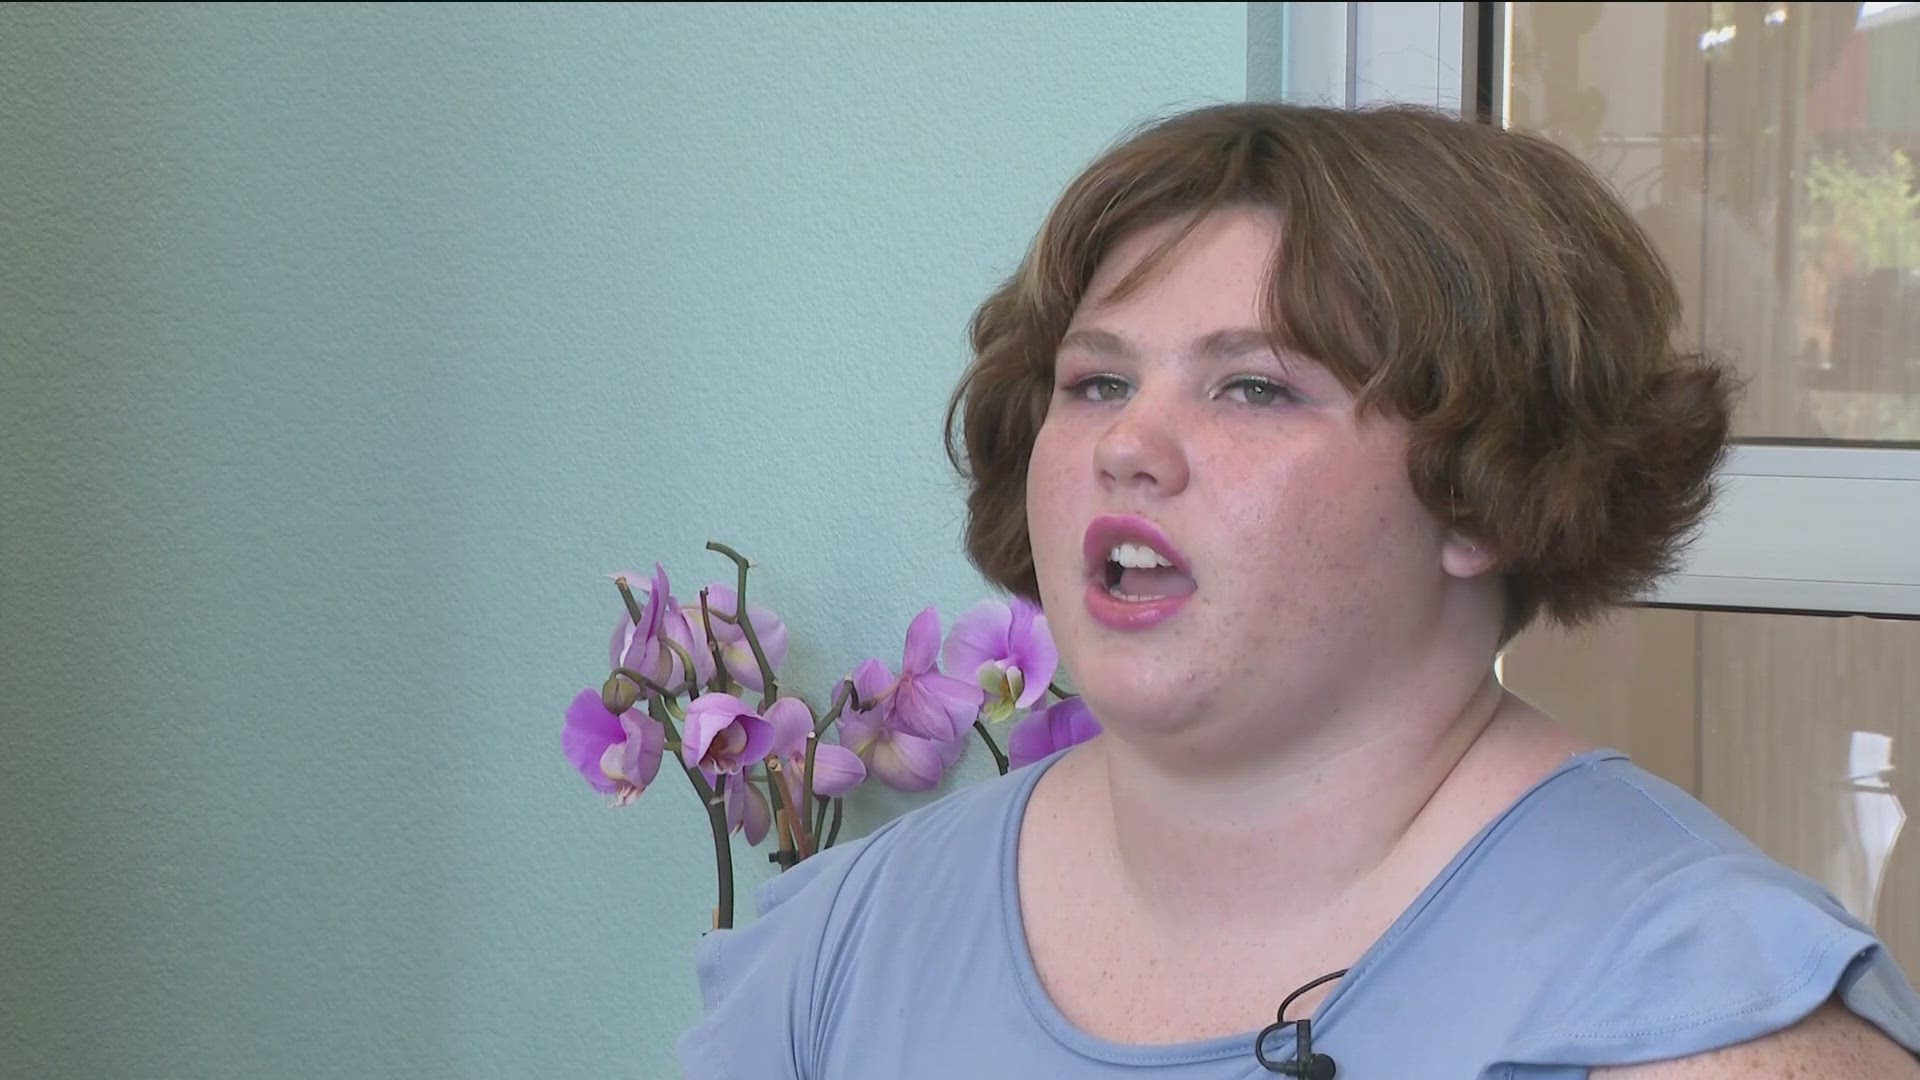 Ever week on KVUE, we introduce you to a child in the Texas foster care system who is looking for a forever family.